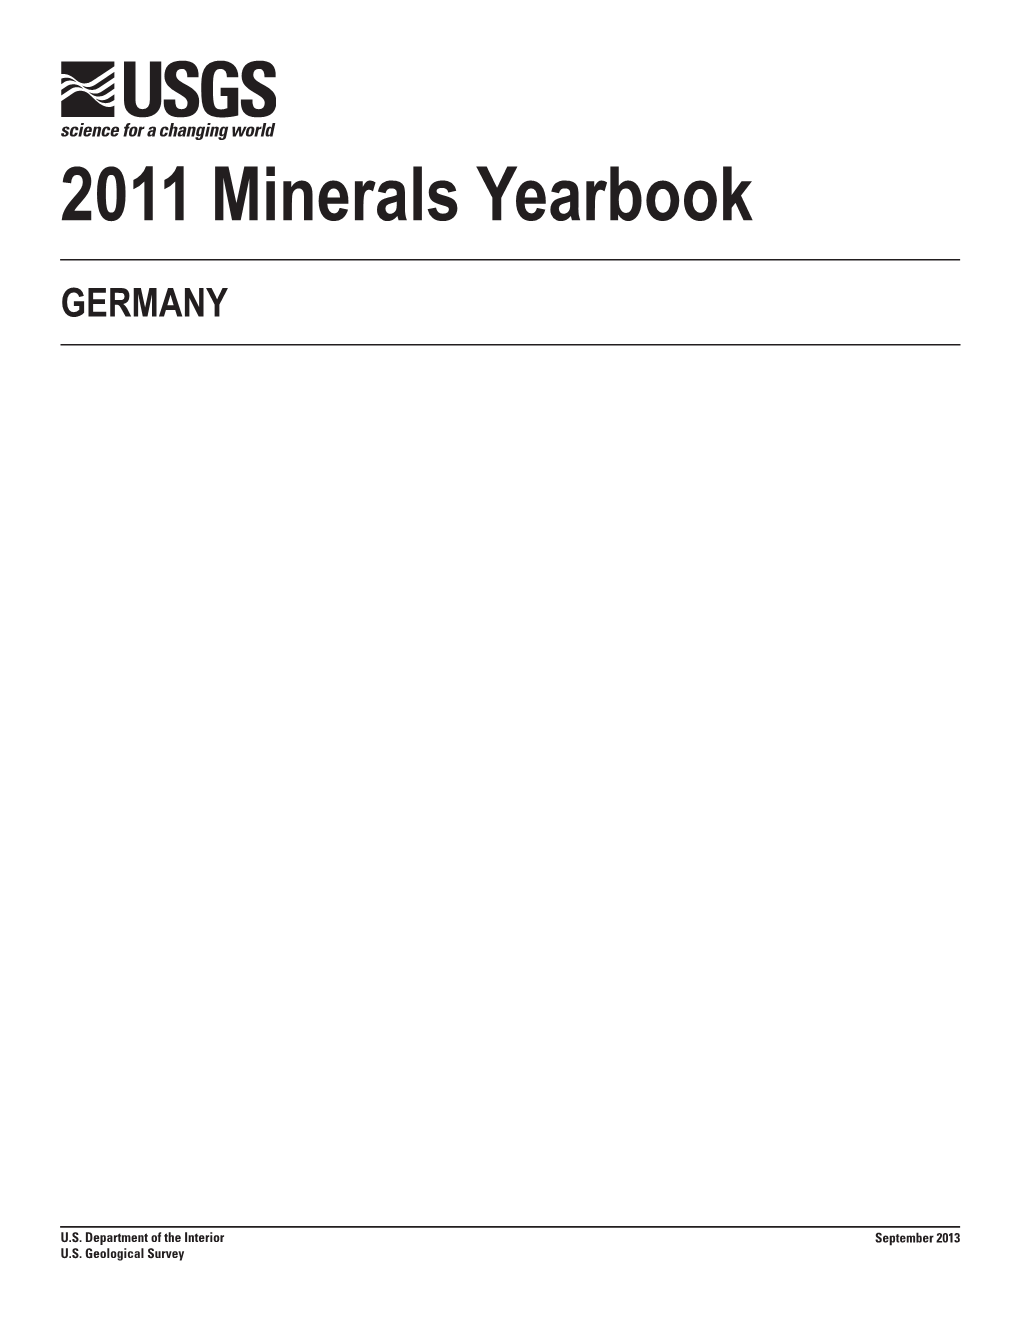 The Mineral Industry of Germany in 2011